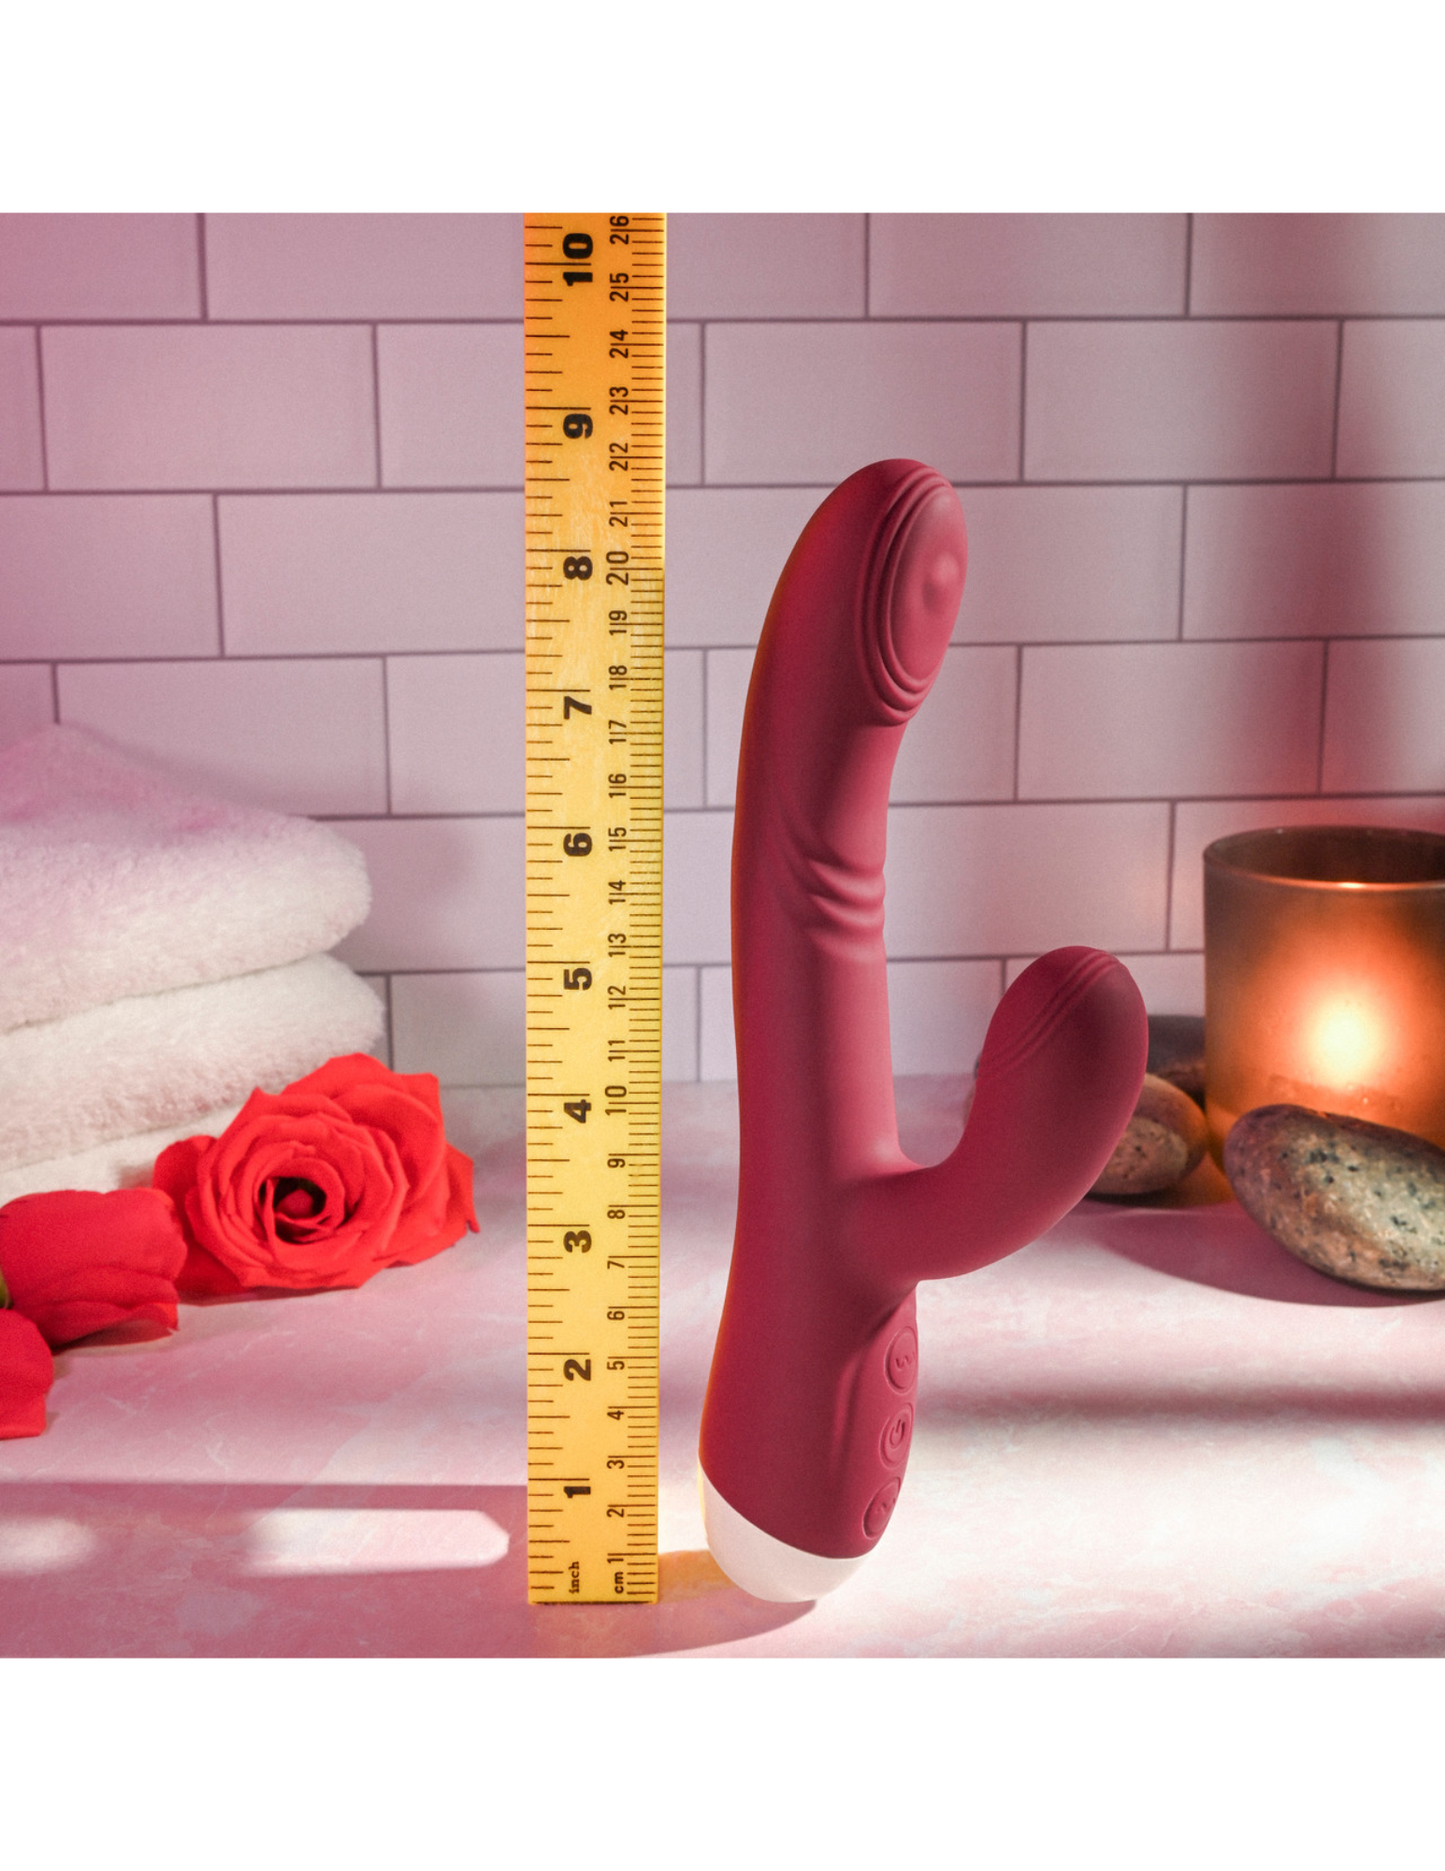 Photo shows the  Double Tap G-Spot Vibrator by Evolved next to a ruler to show its size.